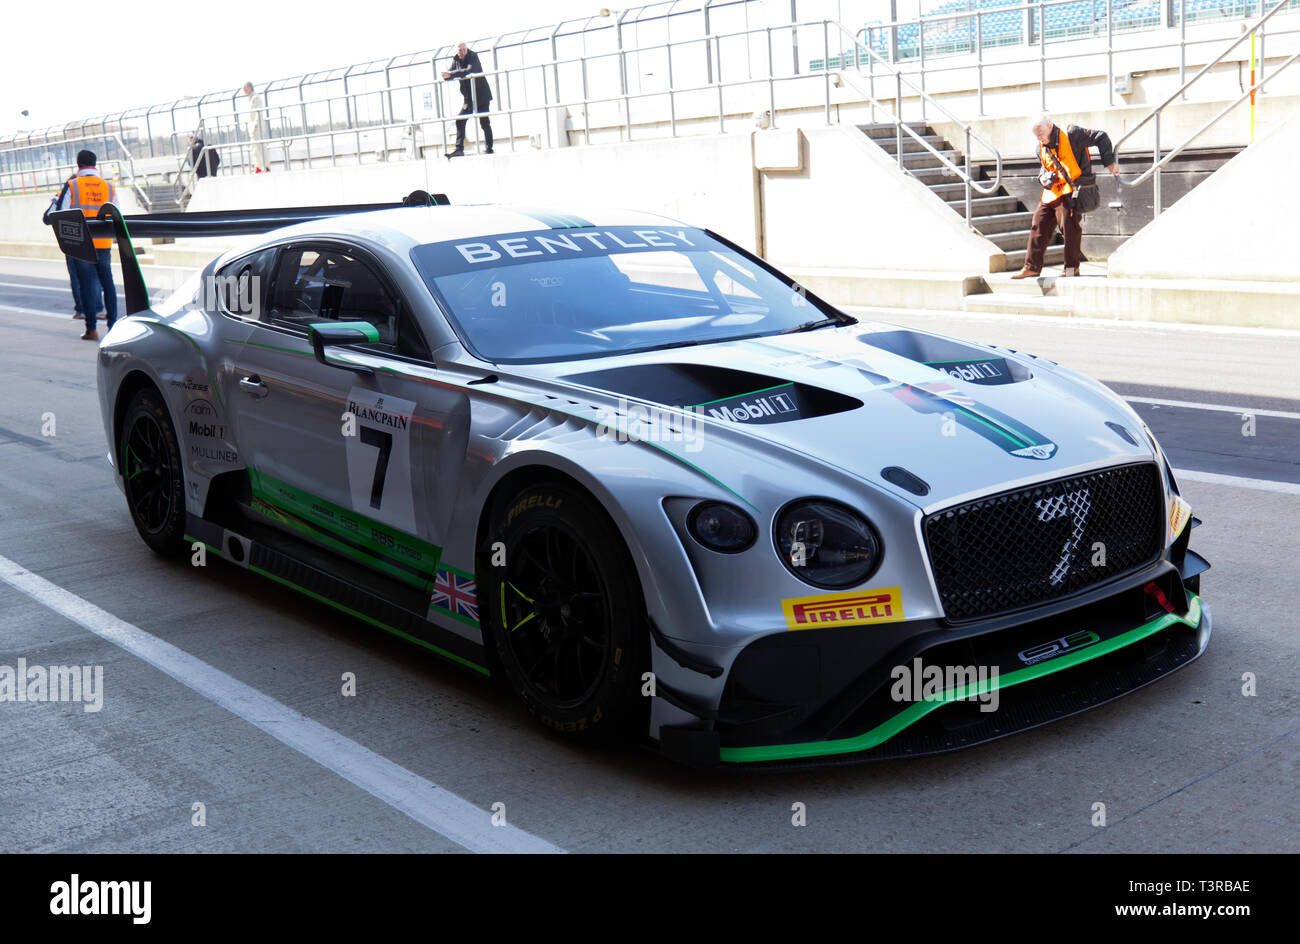 A 2018 Bentley GT3 EXP-11 representing the latest Bentley racing cars, as part of the Bentley Centenary Celebrations at the Silverstone Classic 2019 Stock Photo